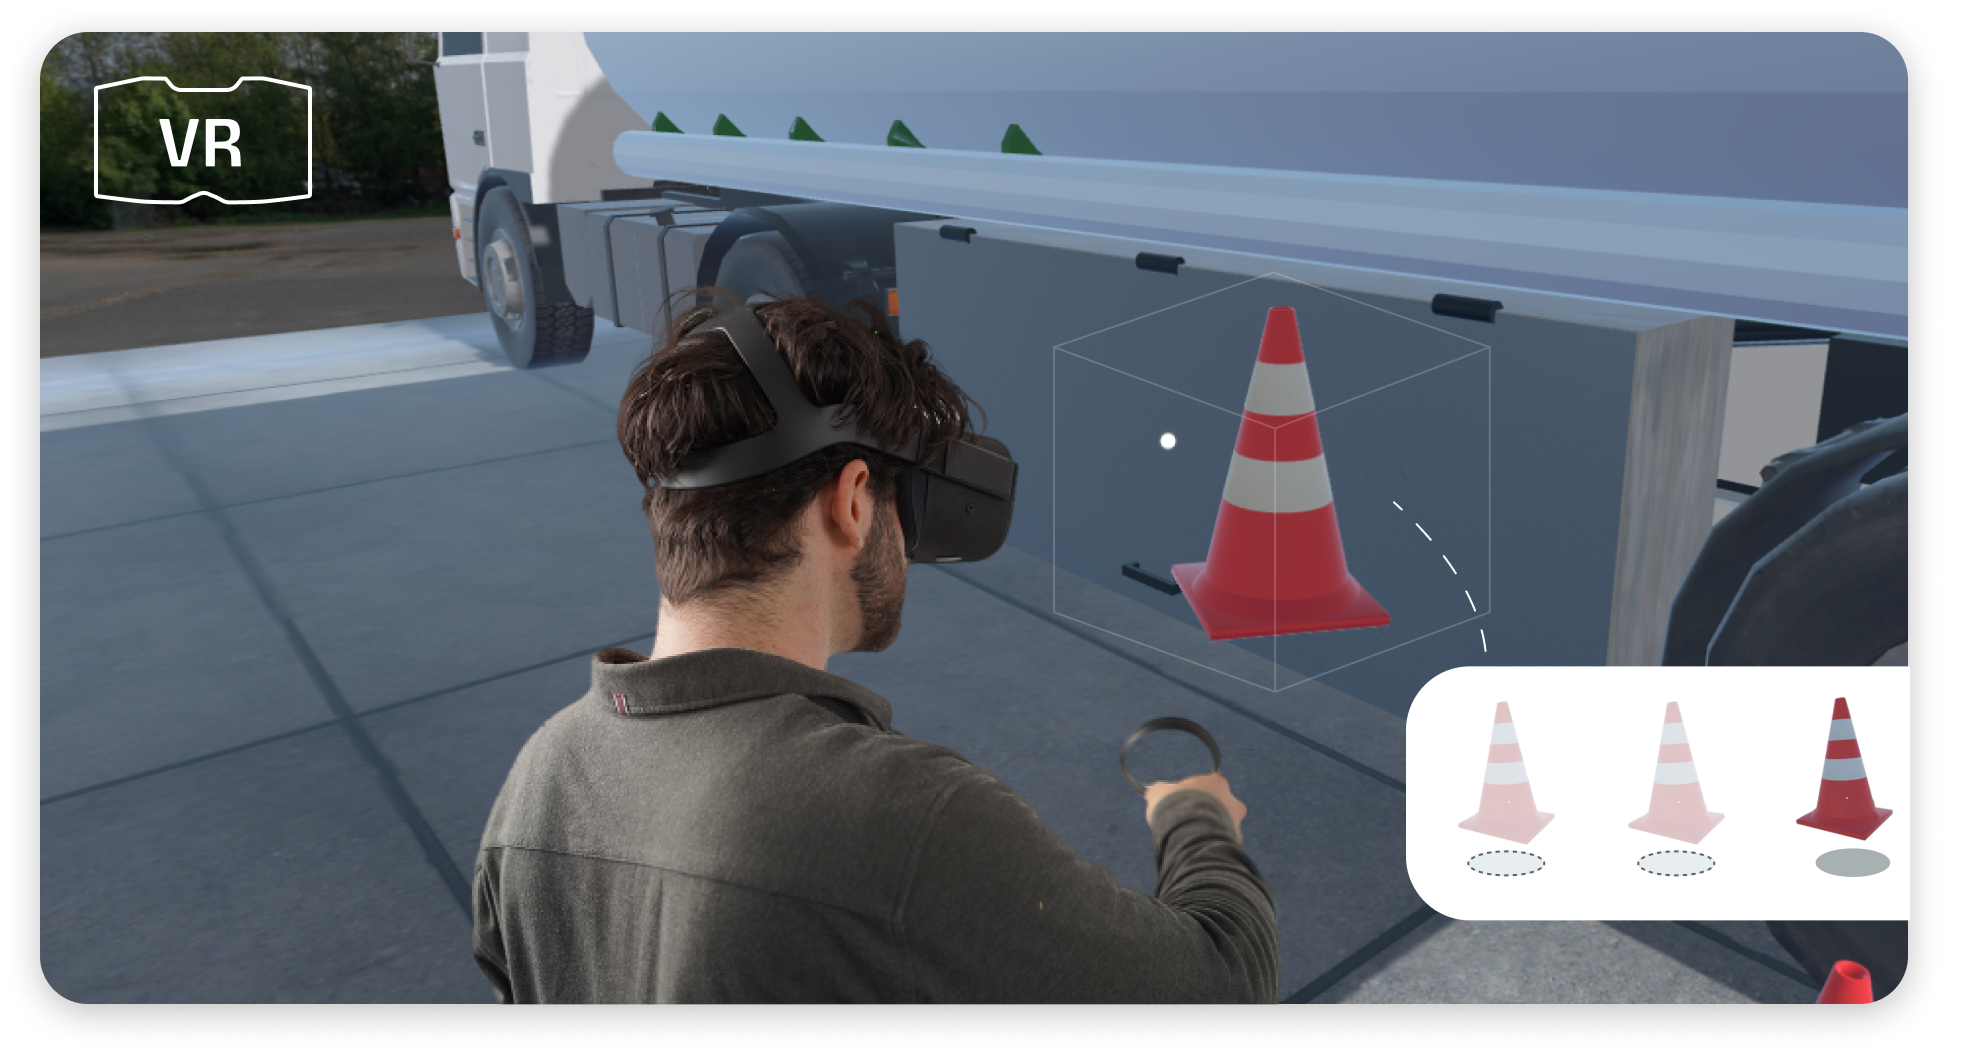 3spin Learning Asset Placement: With our easy-to-use VR learning platform you can easily place assets whereever you want in your training.